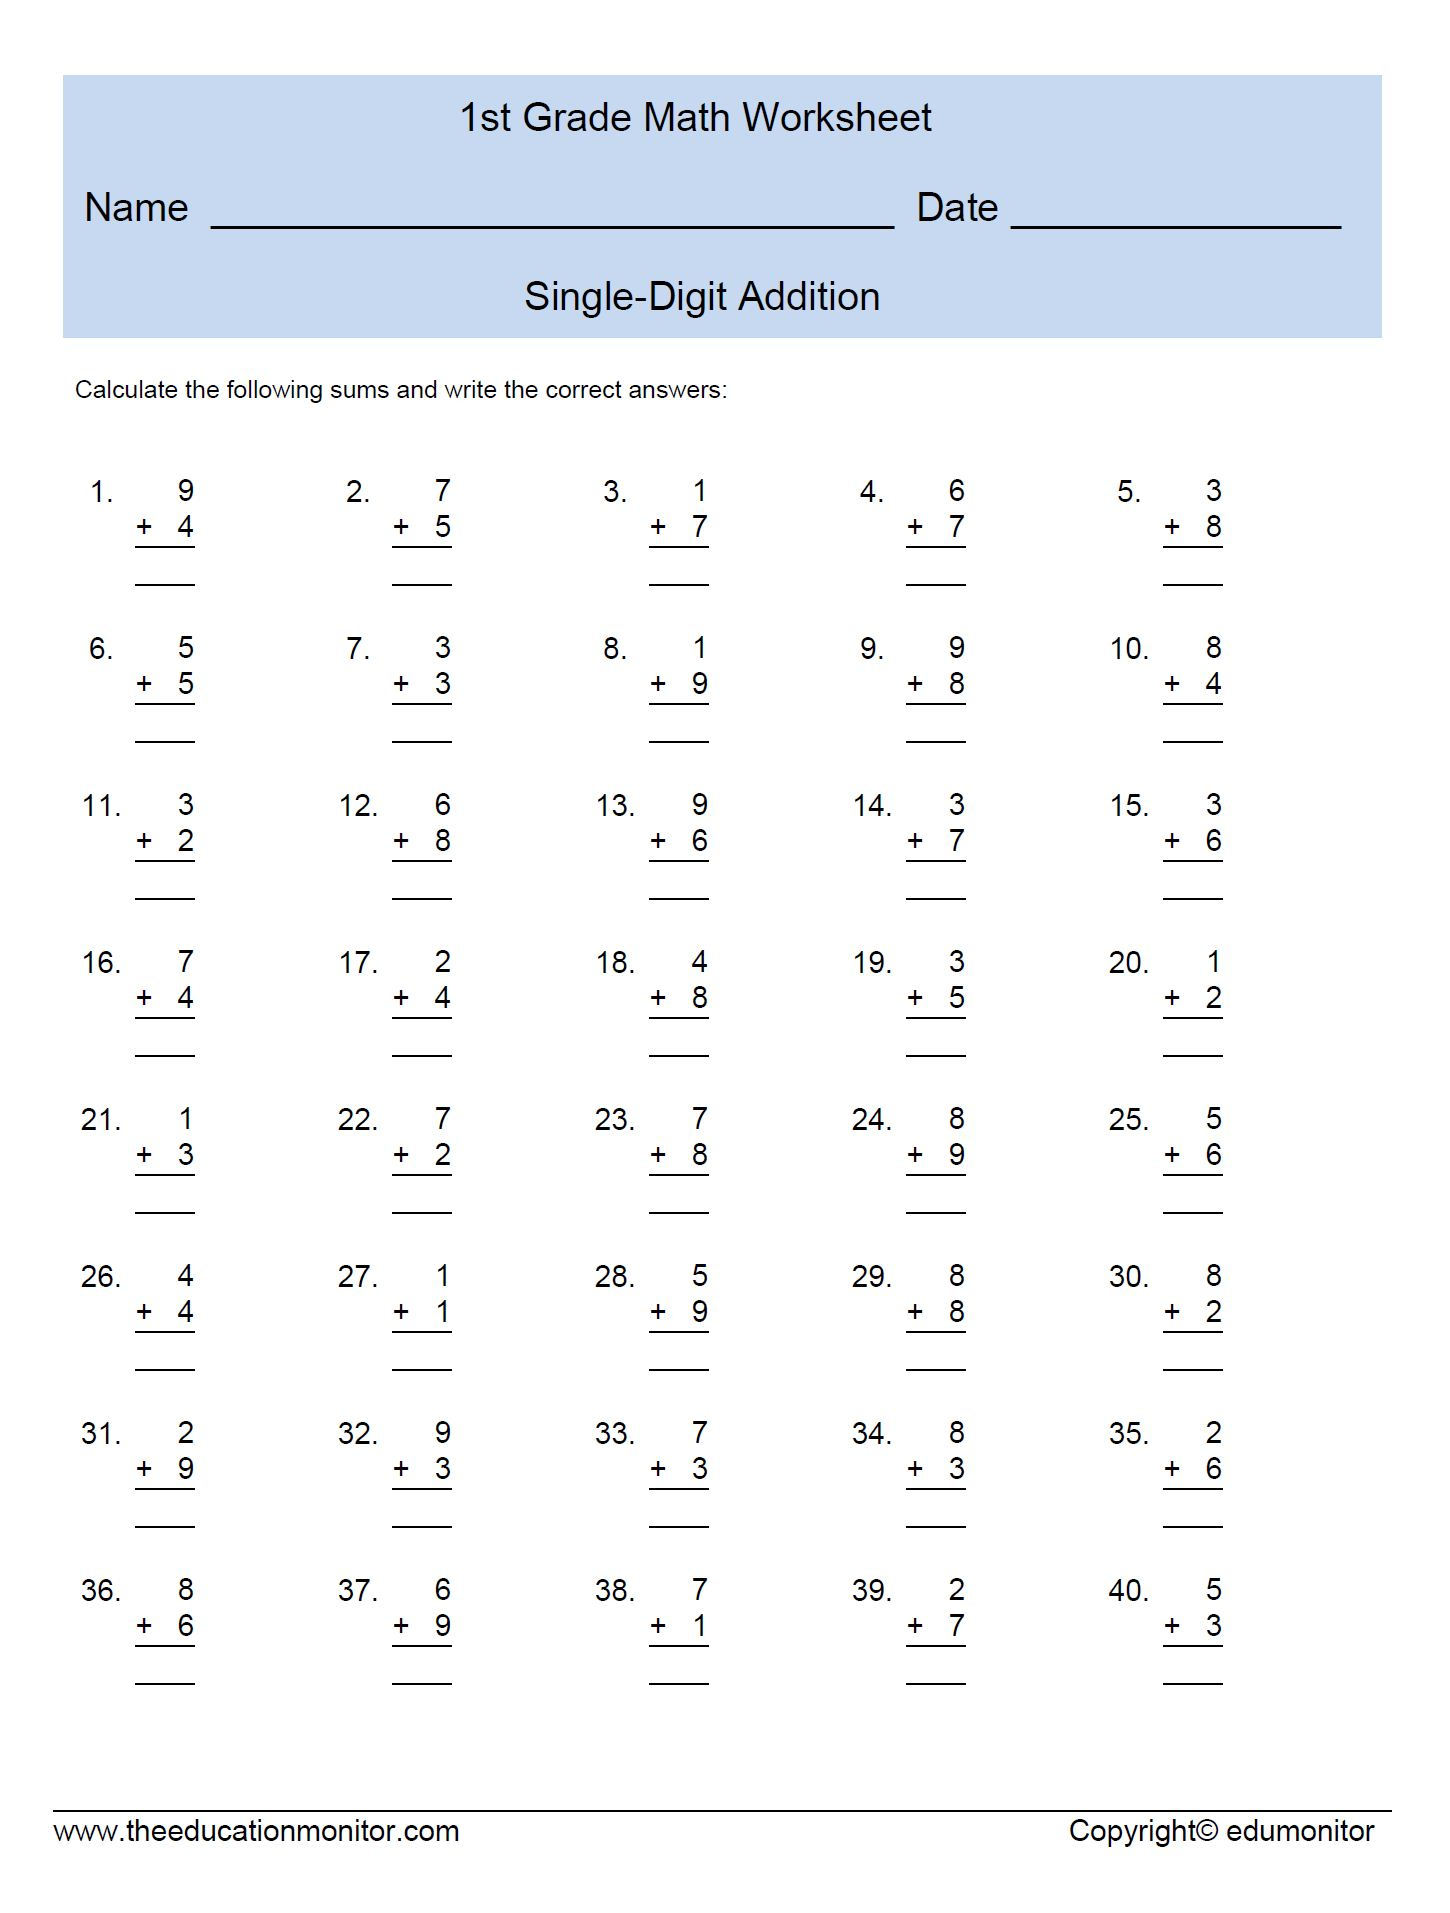 Single Digit Addition Worksheets For First Grade | Free Printable Addition Worksheets For 1St Grade